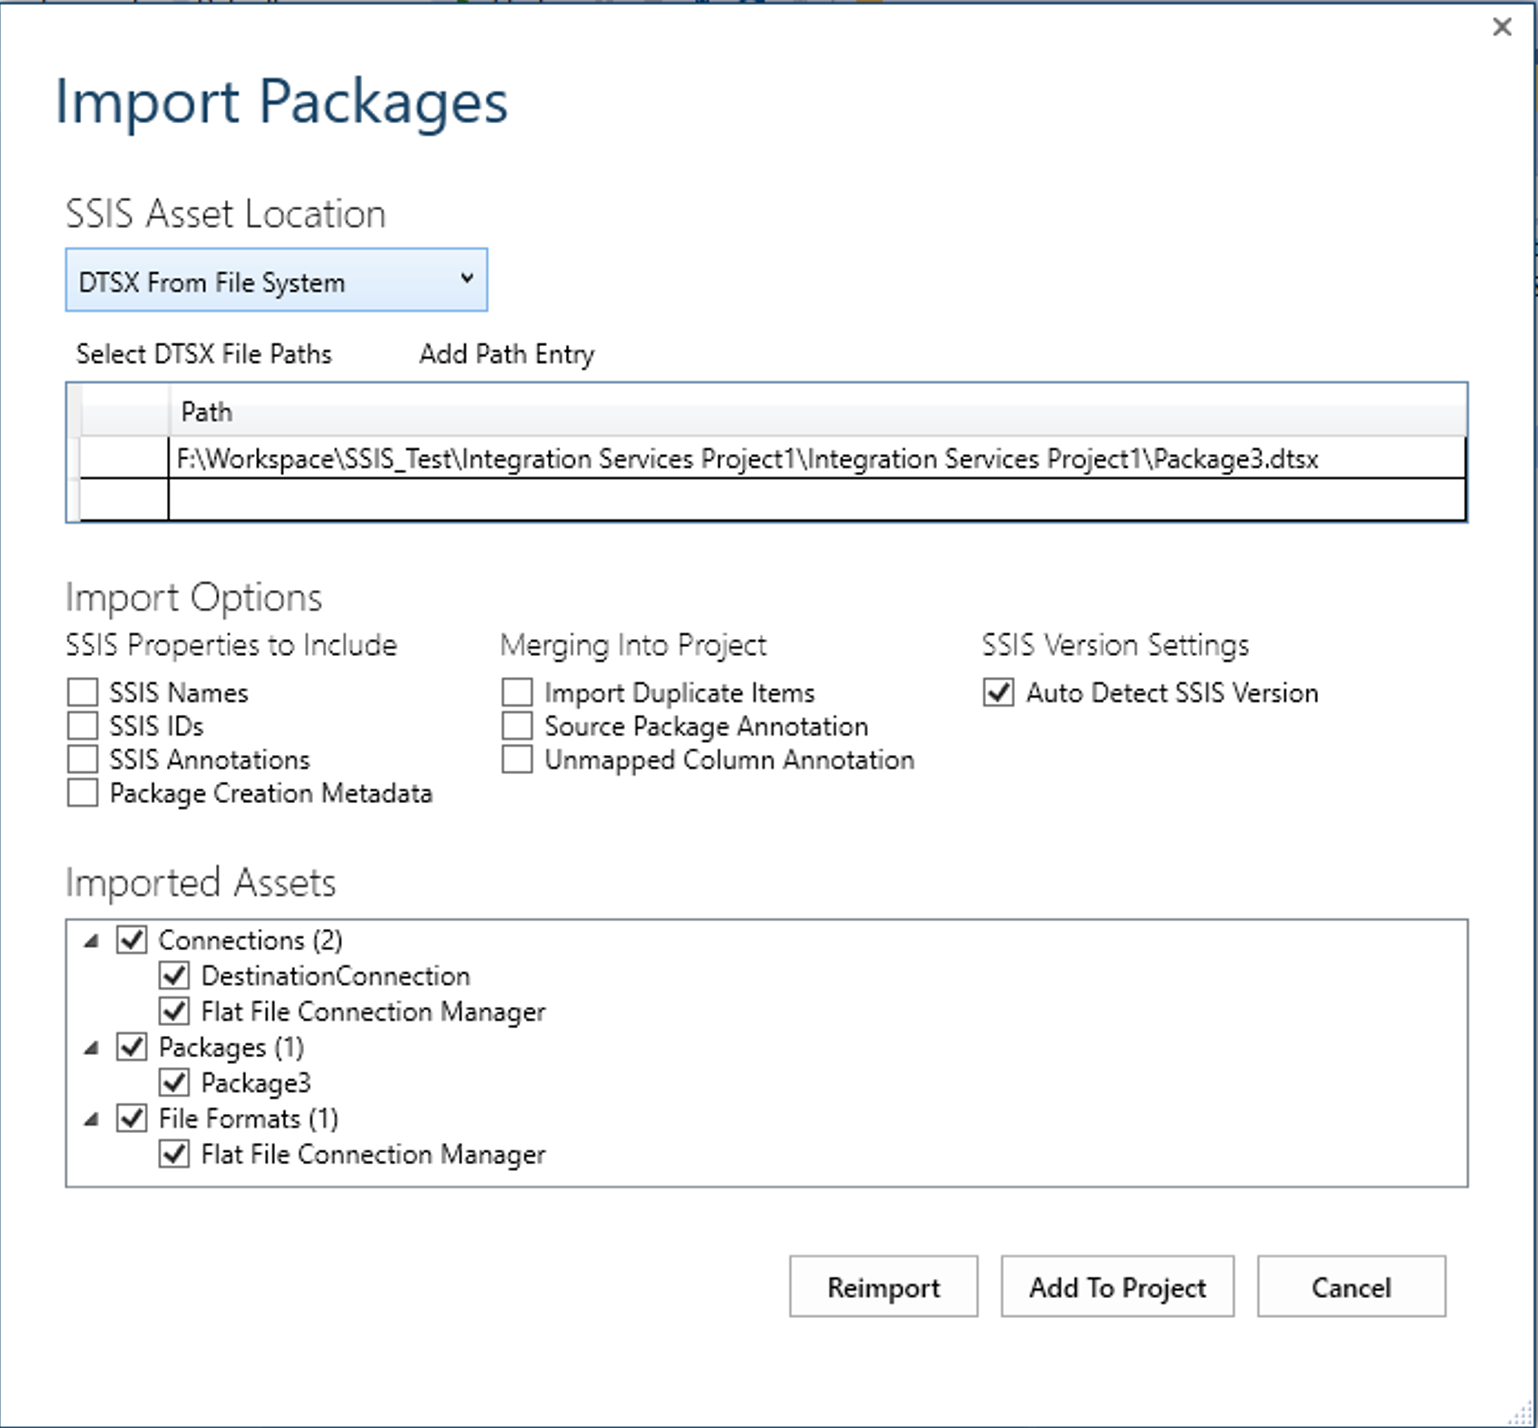 BimlExpress Import packages tool showing package assets